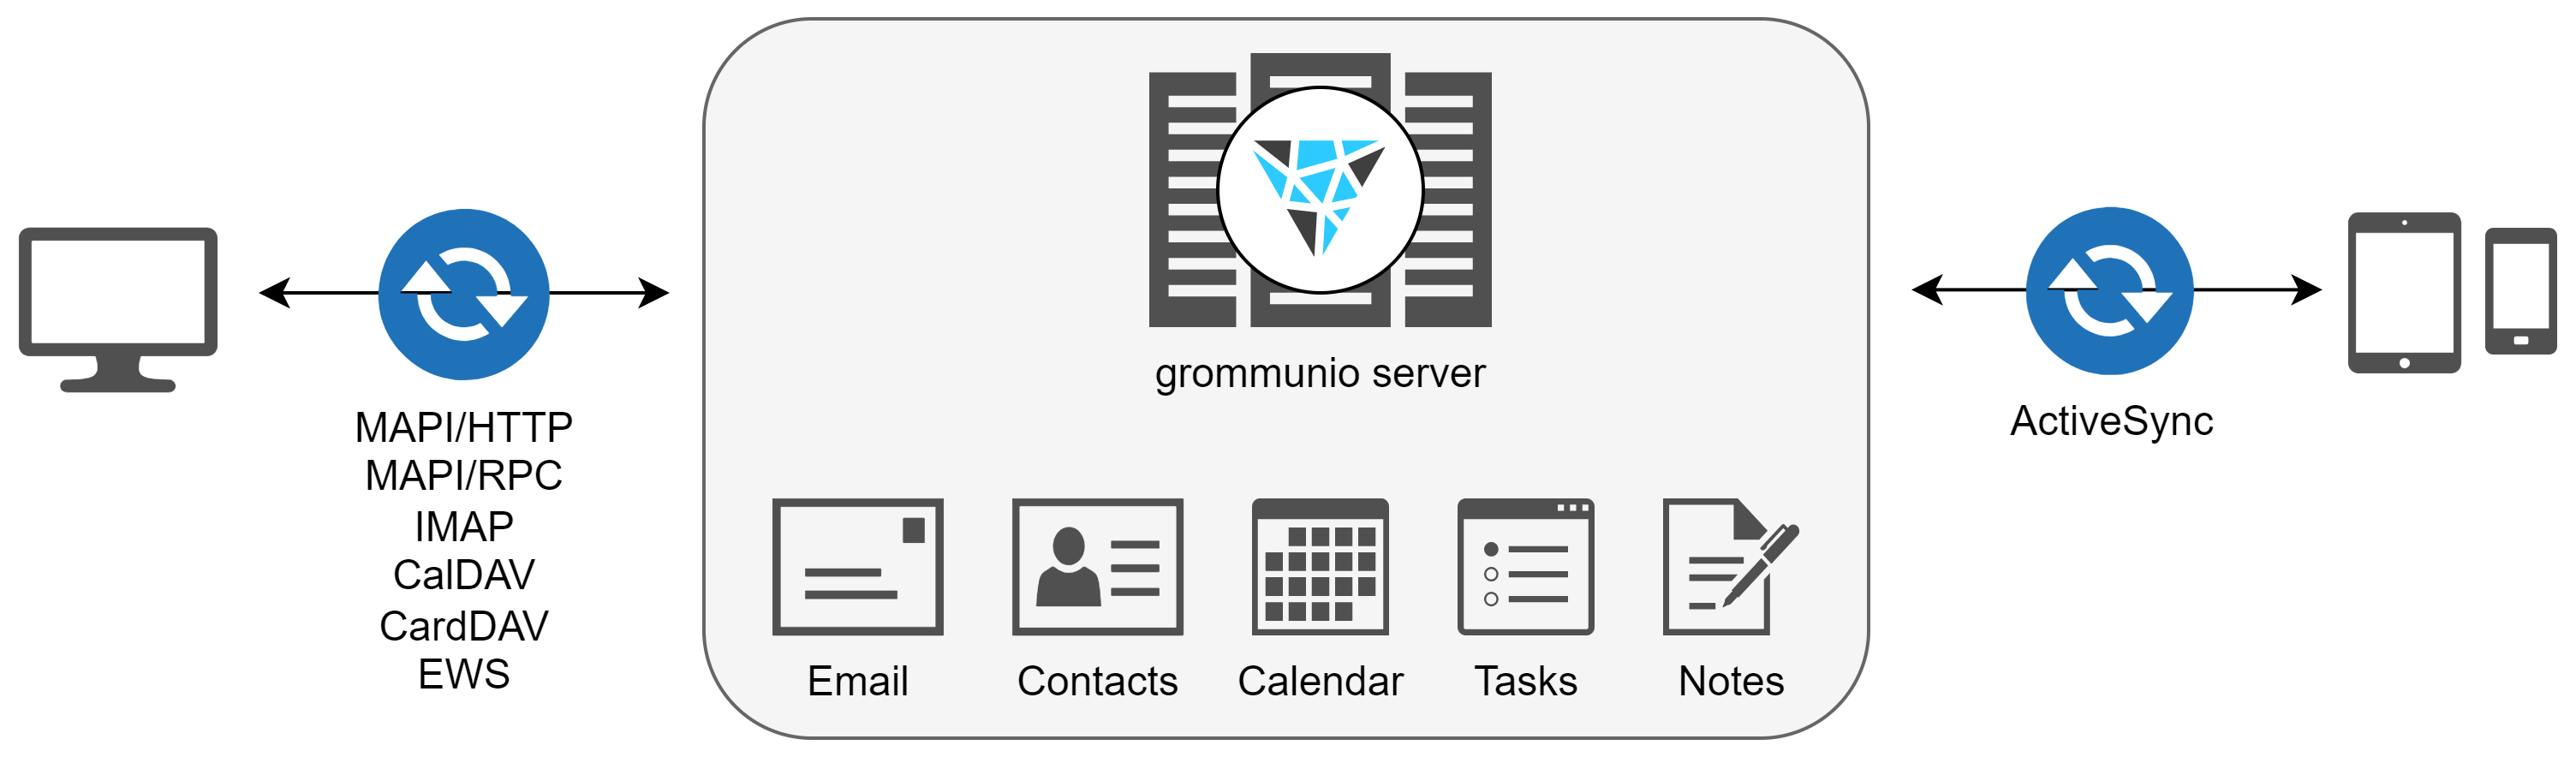 grommunio supports Exchange ActiveSync 16.0 and 16.1